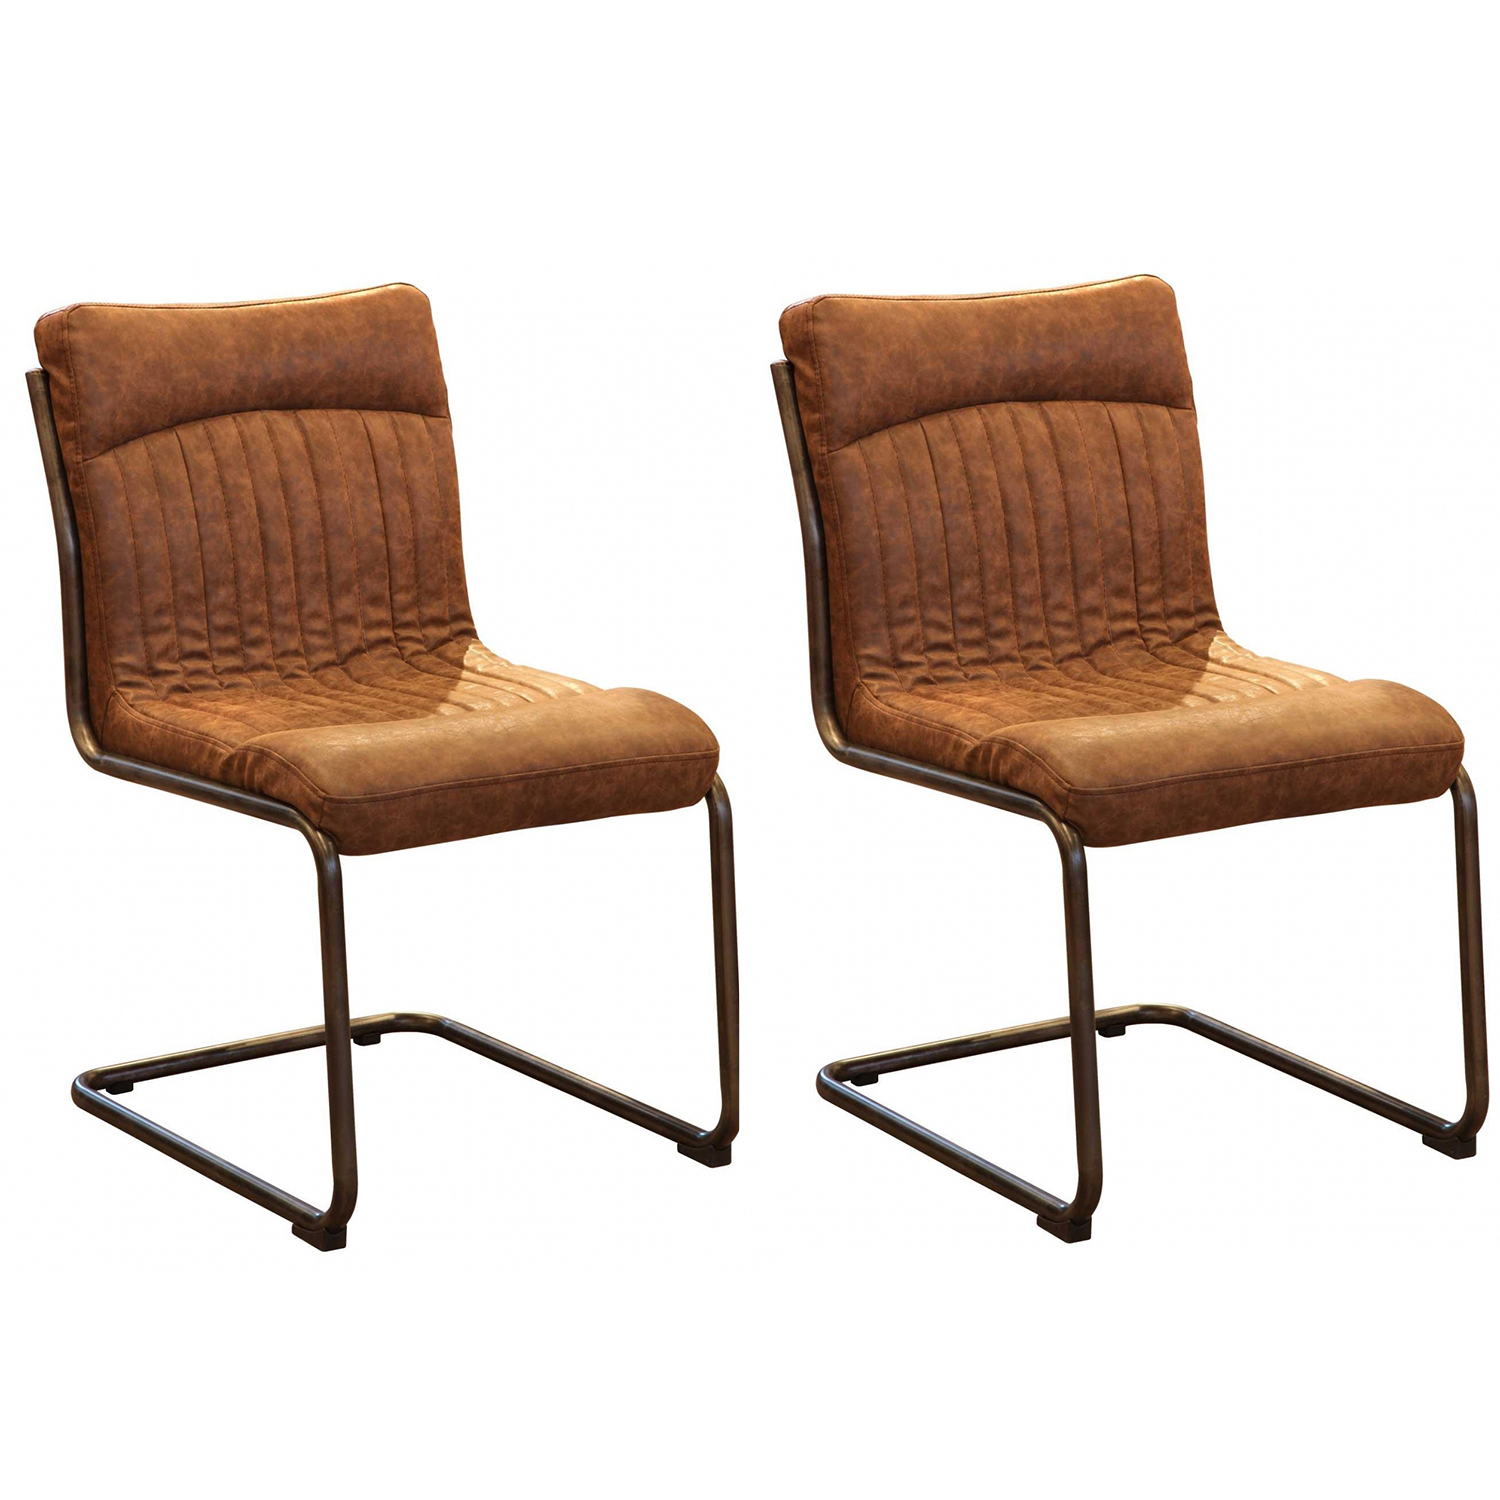 Additions Oak Furniture Hipster Retro, Retro Leather Dining Chairs